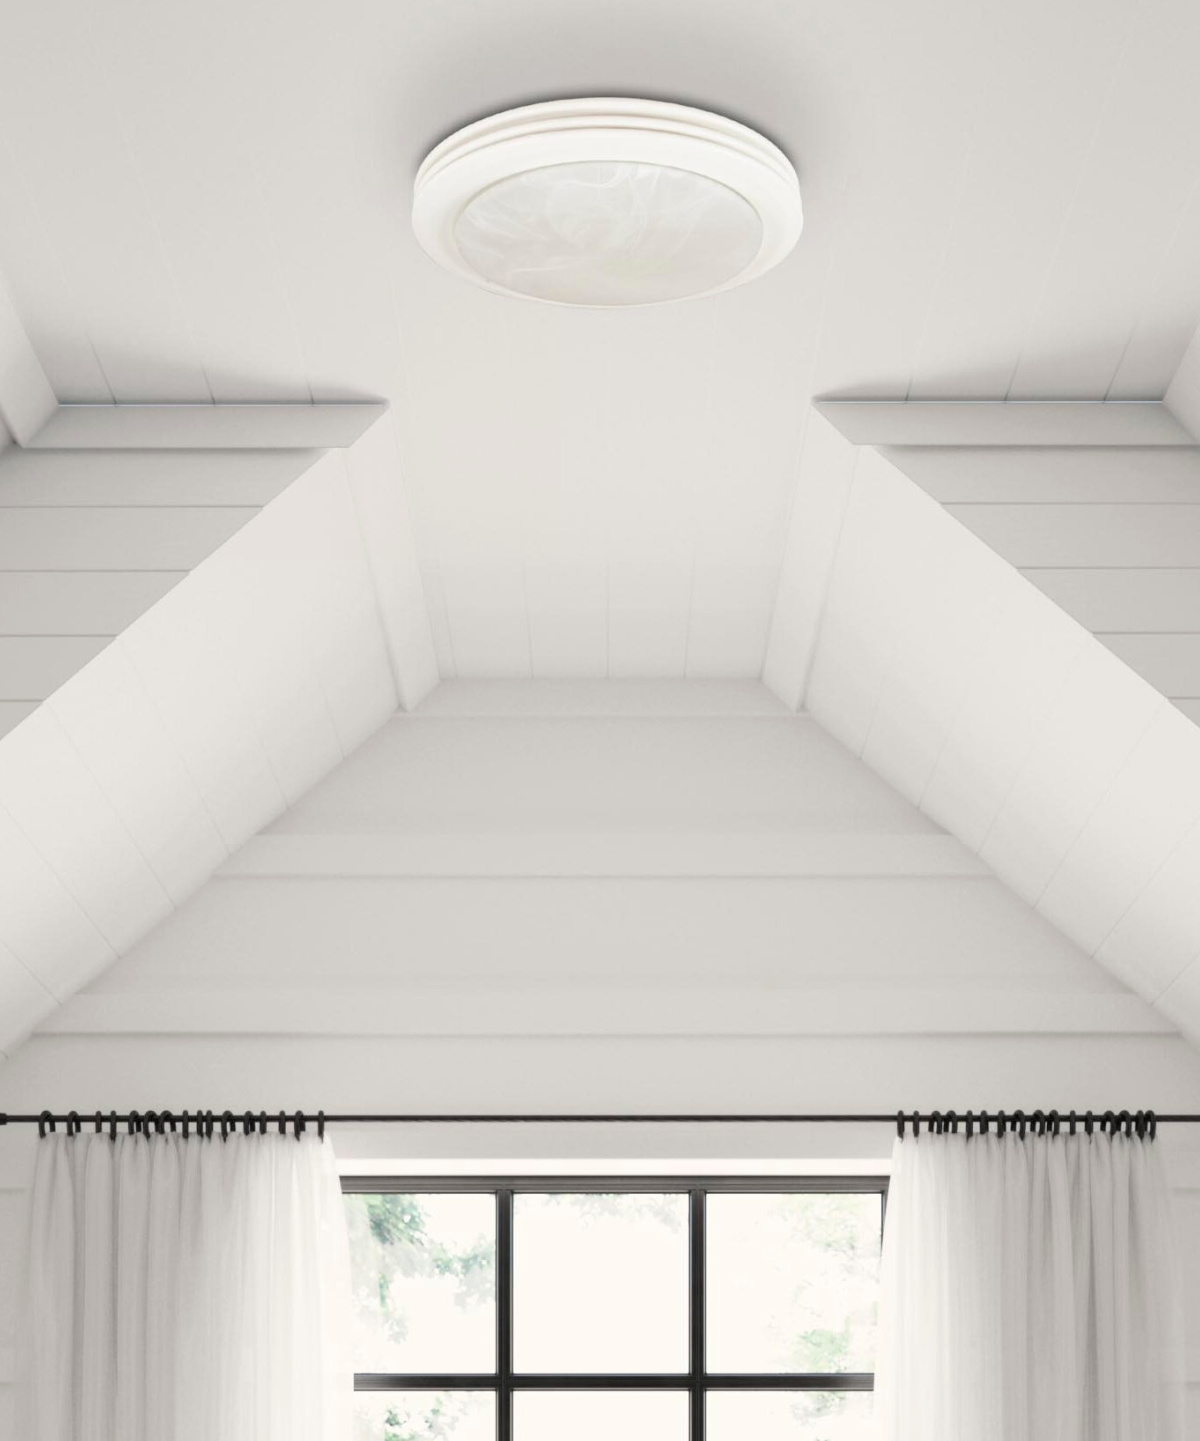 This combination exhaust fan and light adds much more style than your typical bathroom fan!